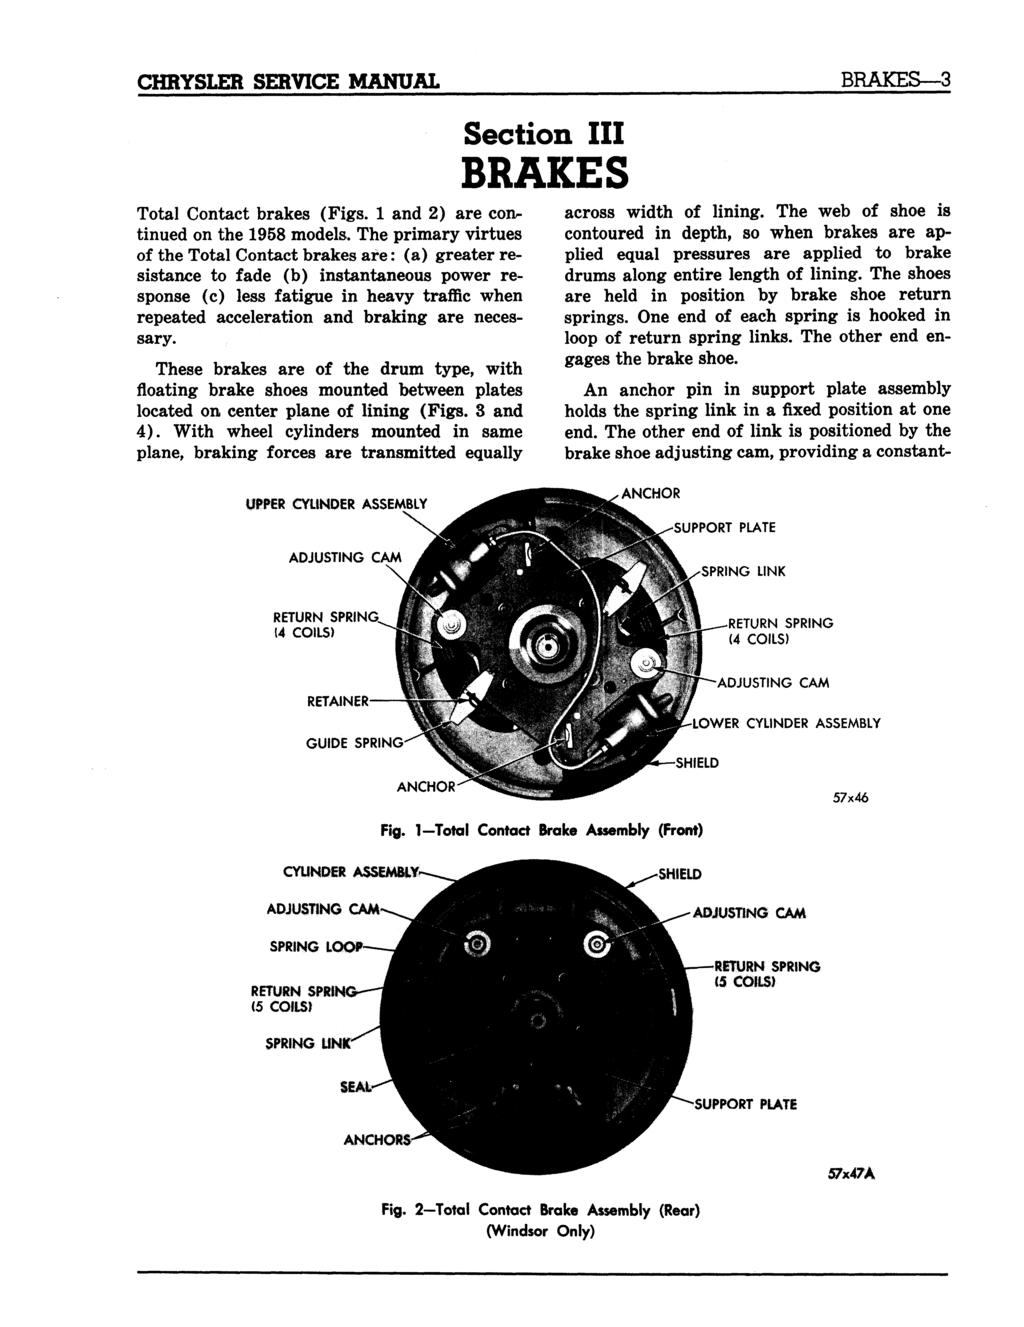 CHRYSLER SERVICE MANUAL Total Contact brakes (Figs. 1 and 2) are continued on the 1958 models.